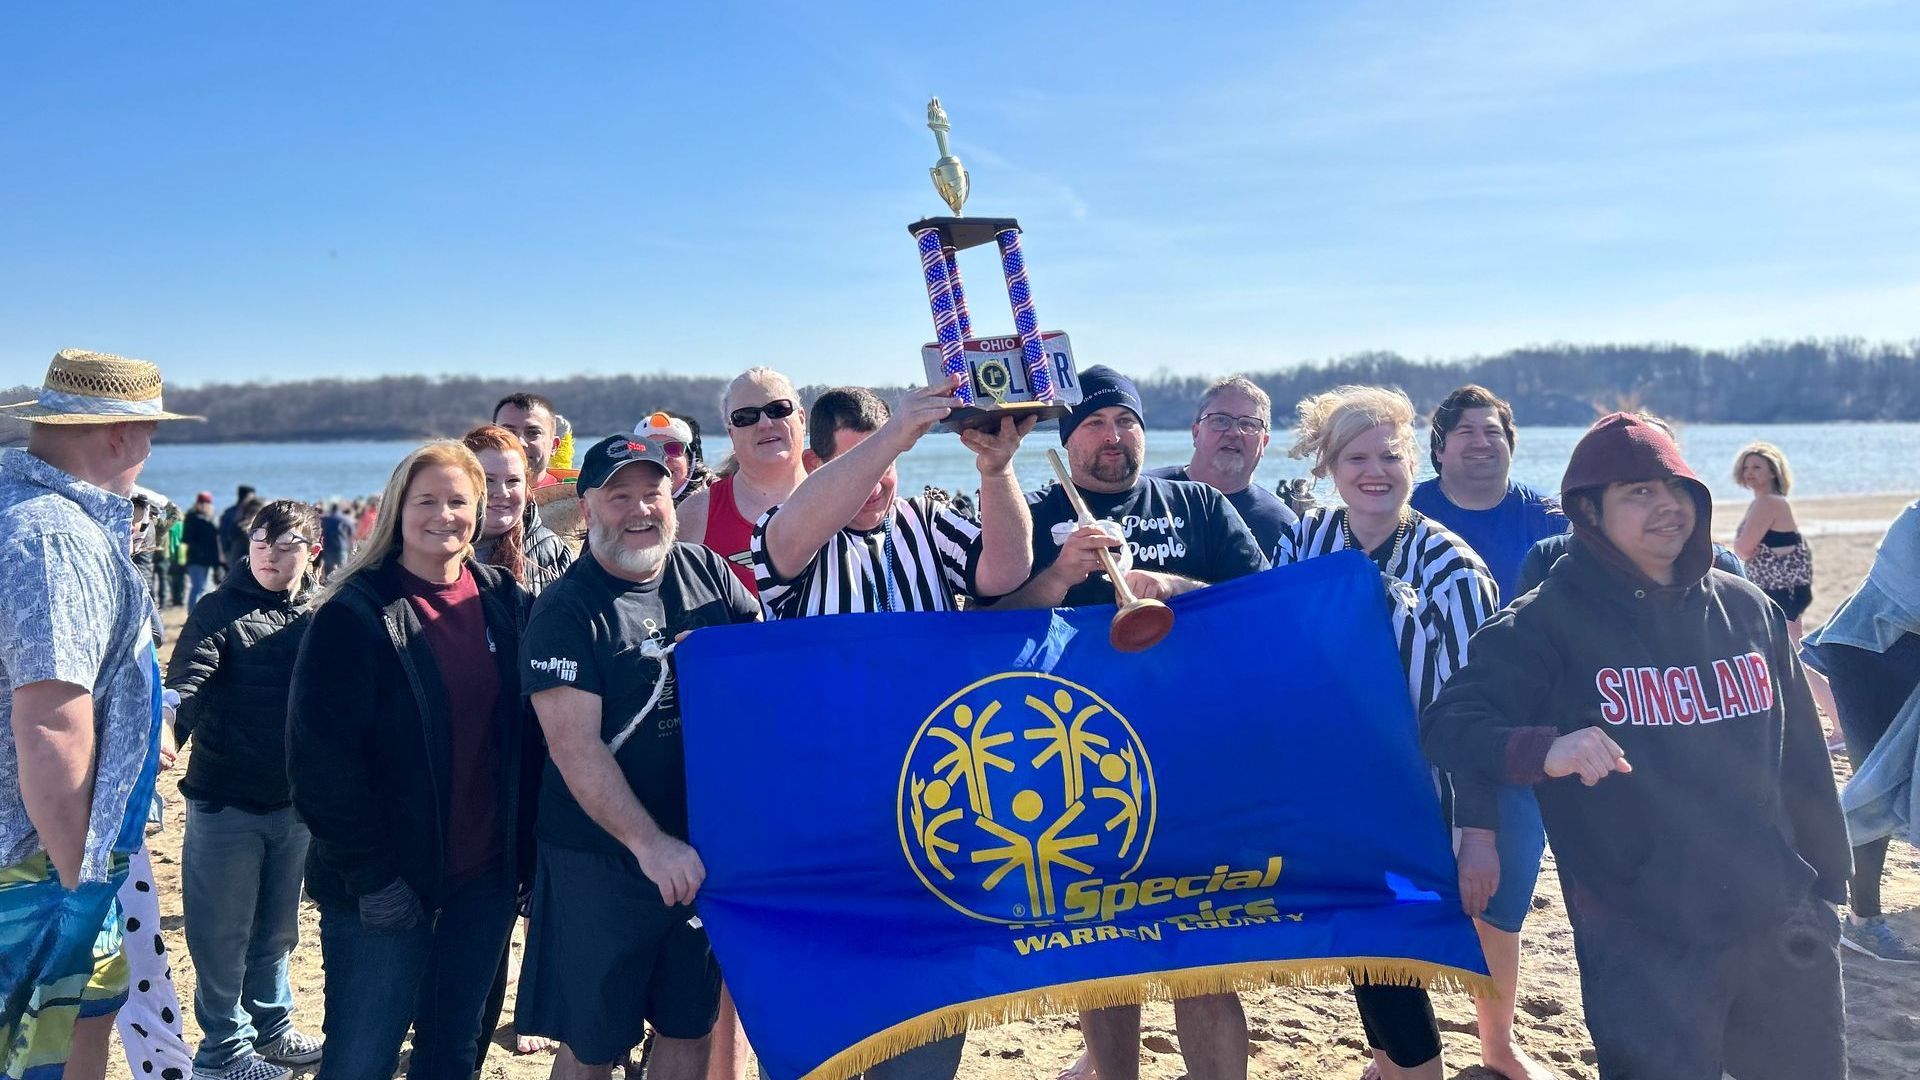 WCBDD Superintendent, Megan Manuel (left), and the Warren County Wildcats basketball team served as top fundraisers at last year's Caesar Creek Polar Plunge